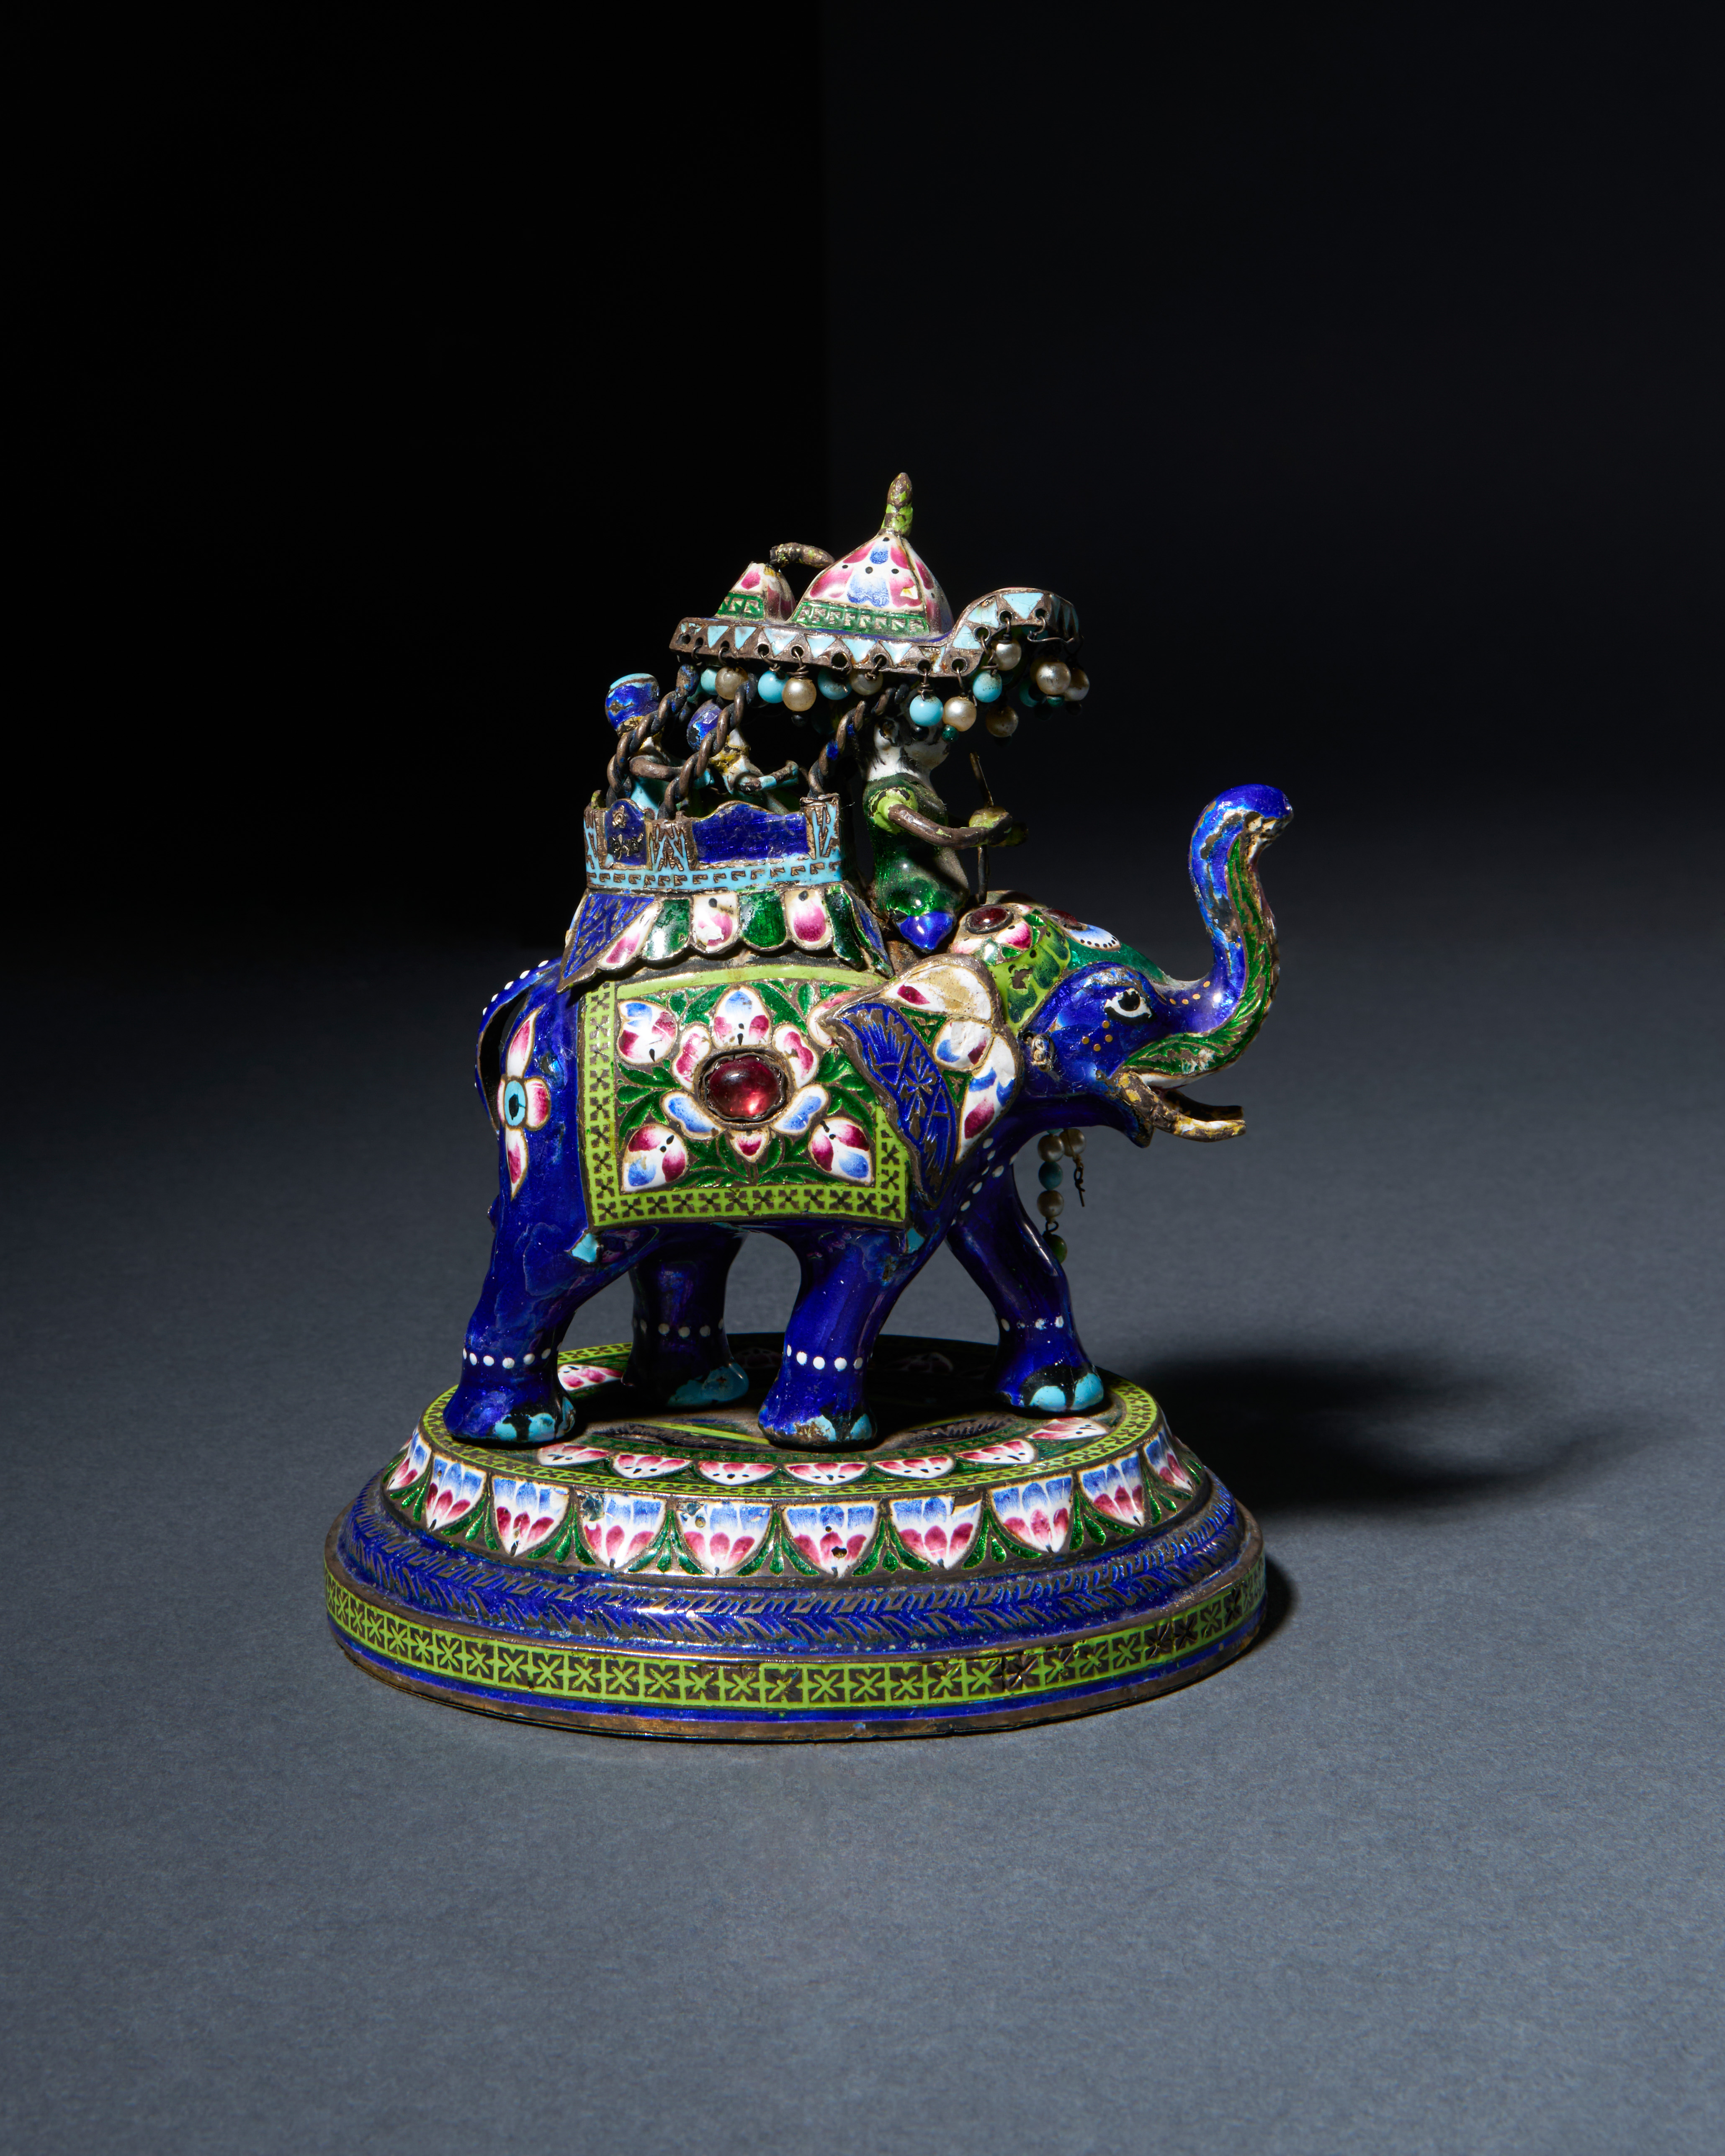 AN INDIAN POLYCHROME ENAMELLED SILVER HOWDAH FIGURE, BENARES, INDIA, 20TH CENTURY